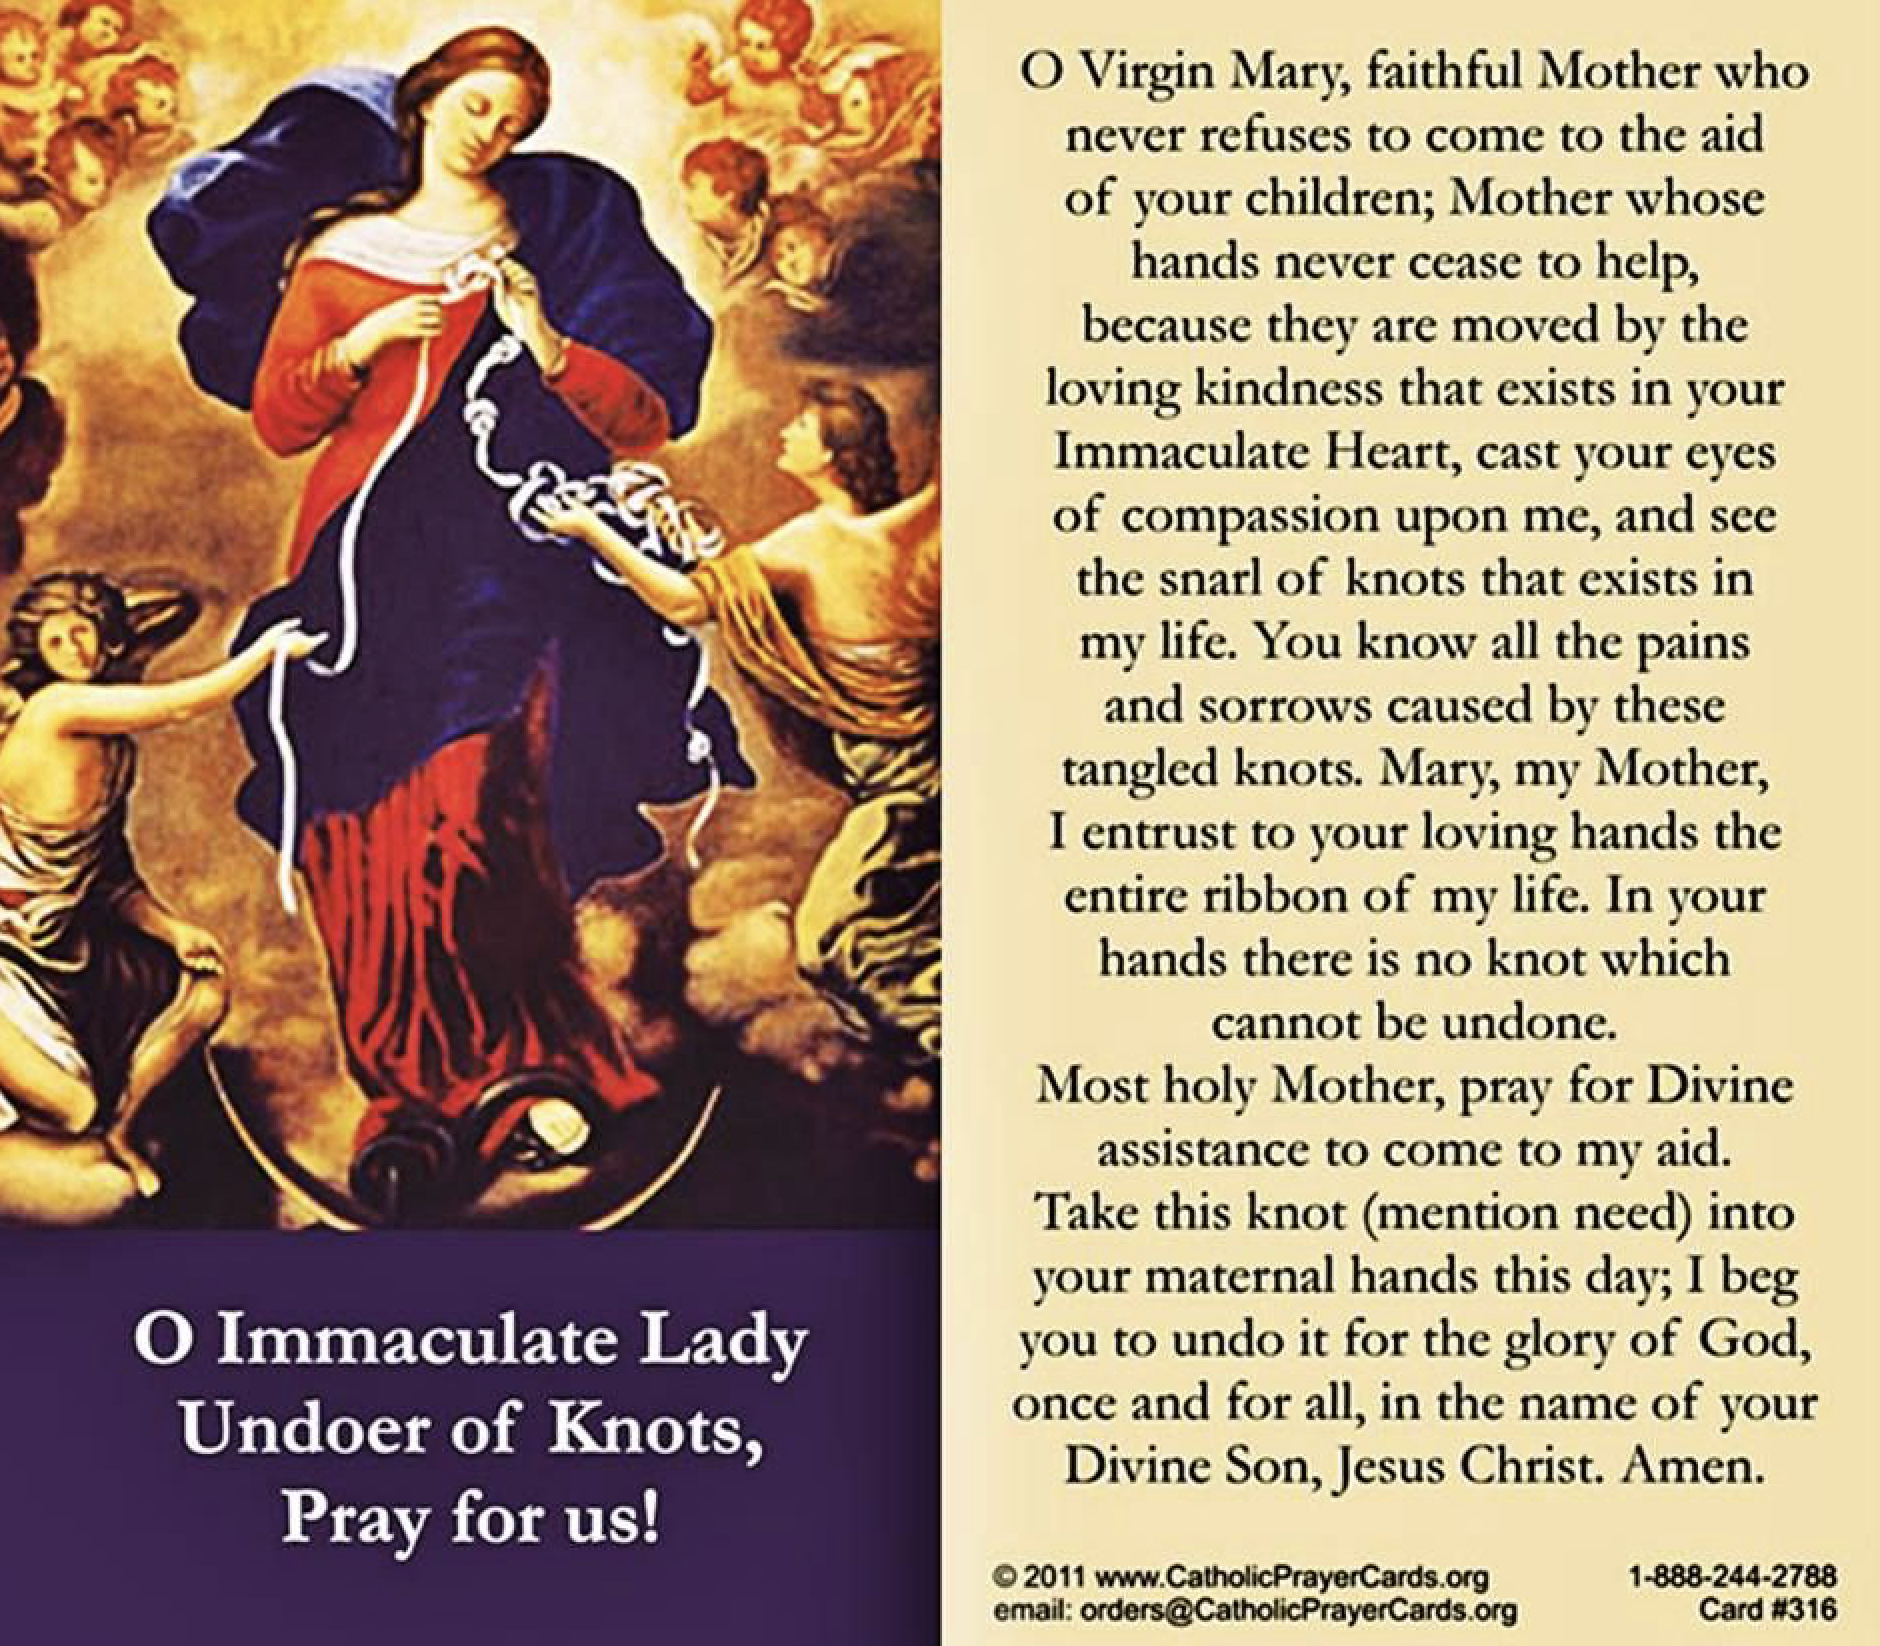 This is the prayer Mary Undoer of Knots